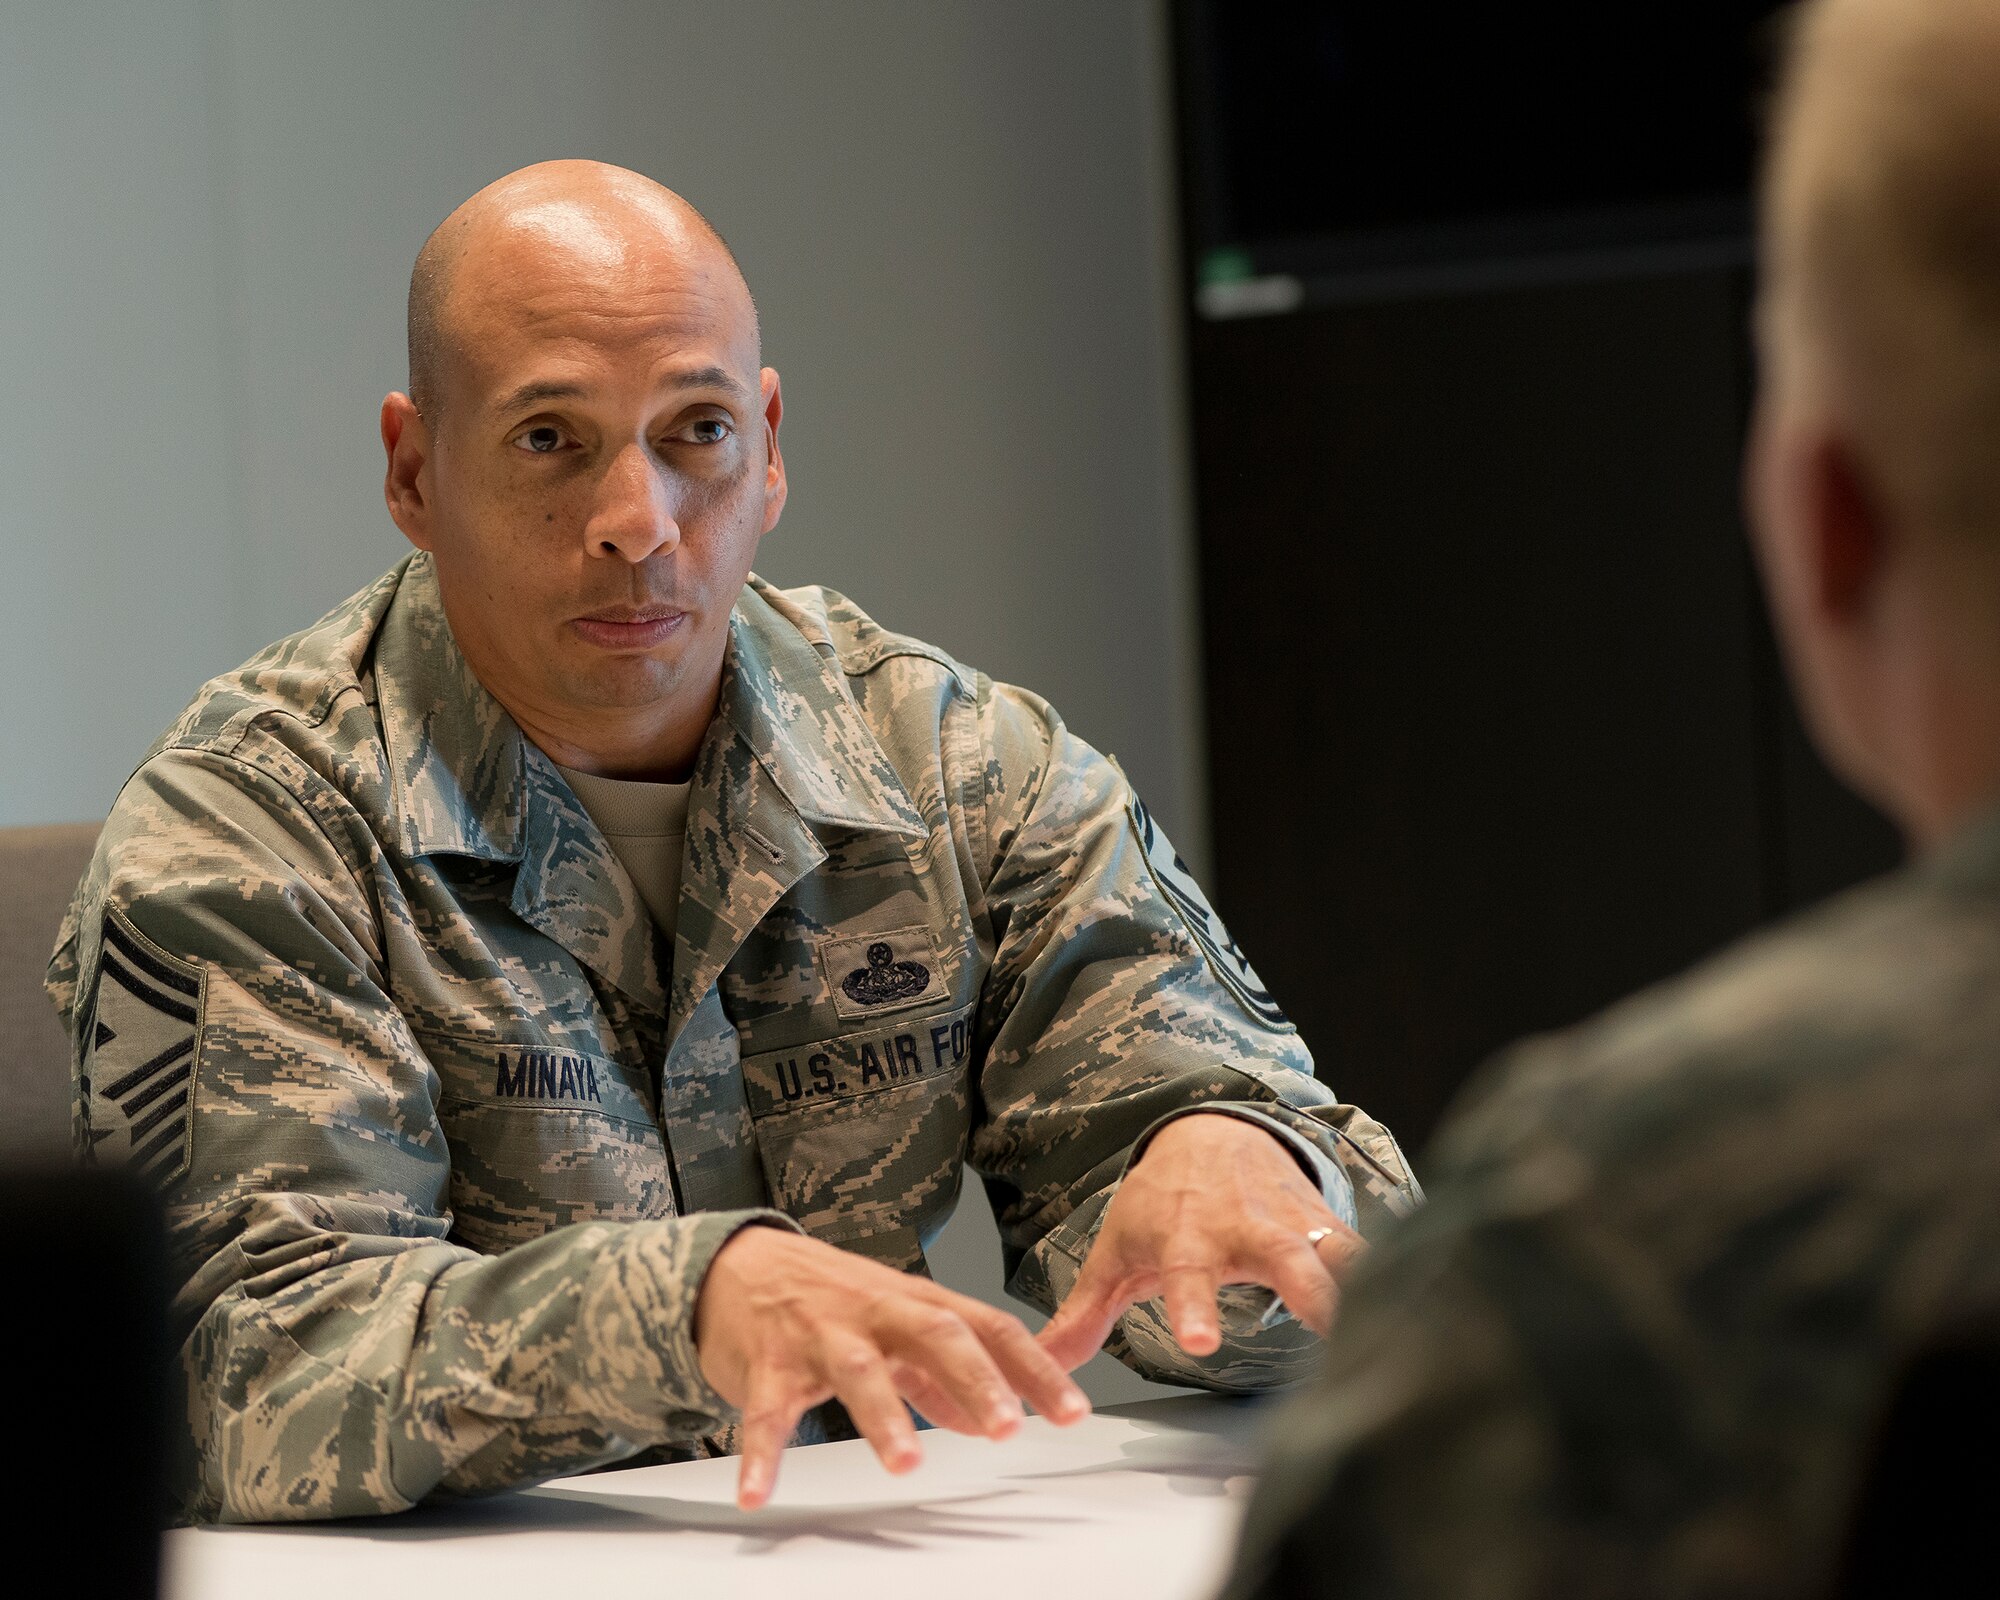 Senior Master Sgt. Jack N. Minaya, 2016 Air National Guard Outstanding First Sergeant of the Year, speaks with junior non-commissioned officers during a mentoring session at the Air National Guard Readiness Center on Joint Base Andrews, Maryland, June 8, 2016. (Air National Guard photo by Master Sgt. Marvin R. Preston/Released)